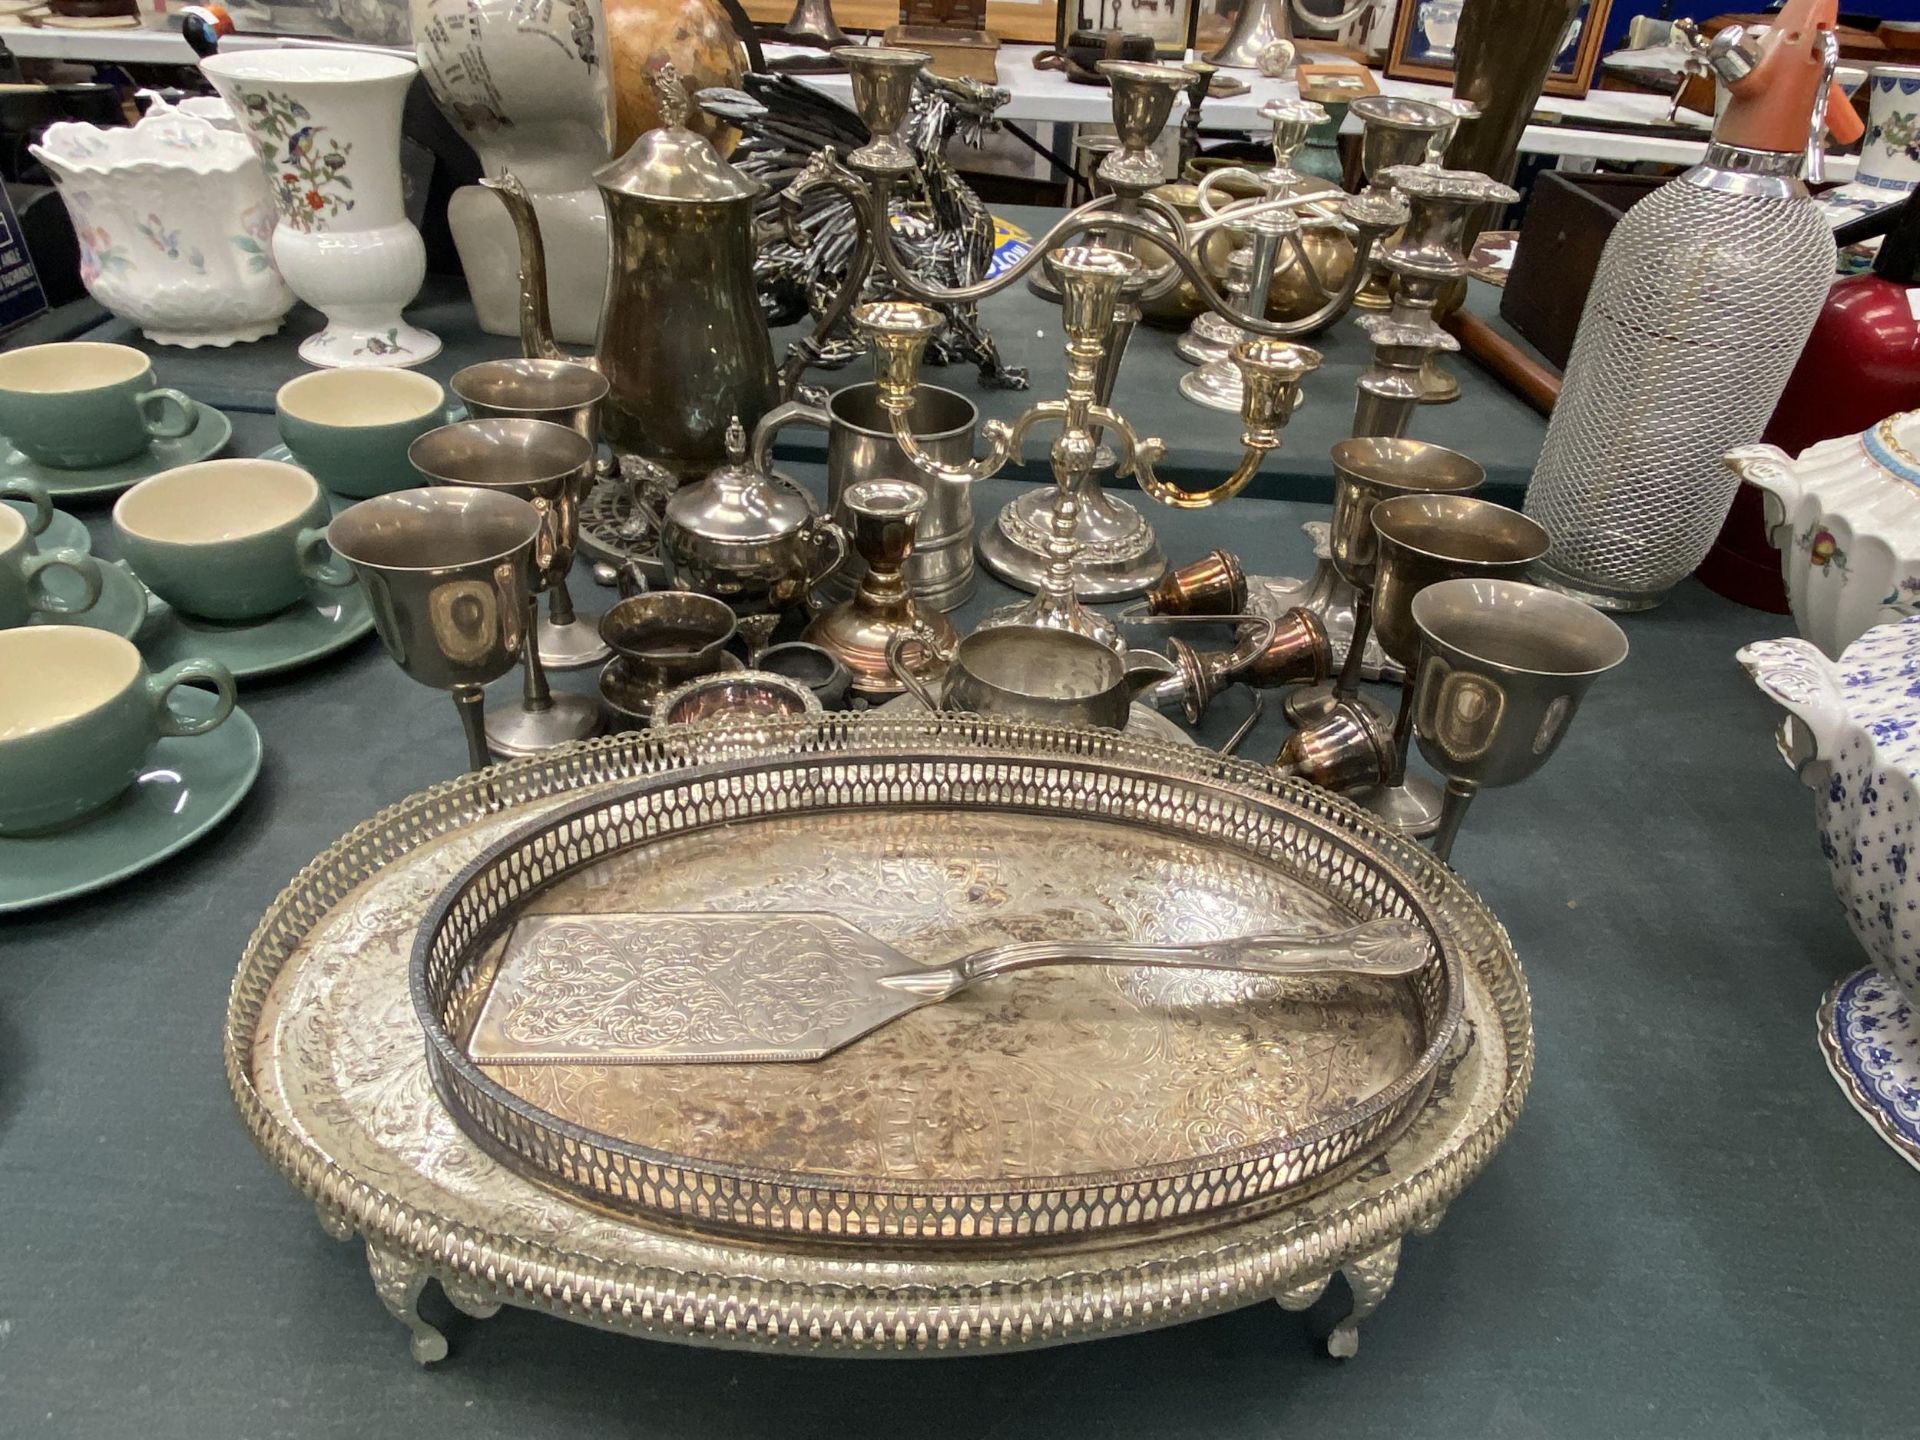 A LARGE QUANTITY OF VINTAGE SILVER PLATED ITEMS TO INCLUDE GALLERIED TRAYS, GOBLETS, CANDLEABRAS,